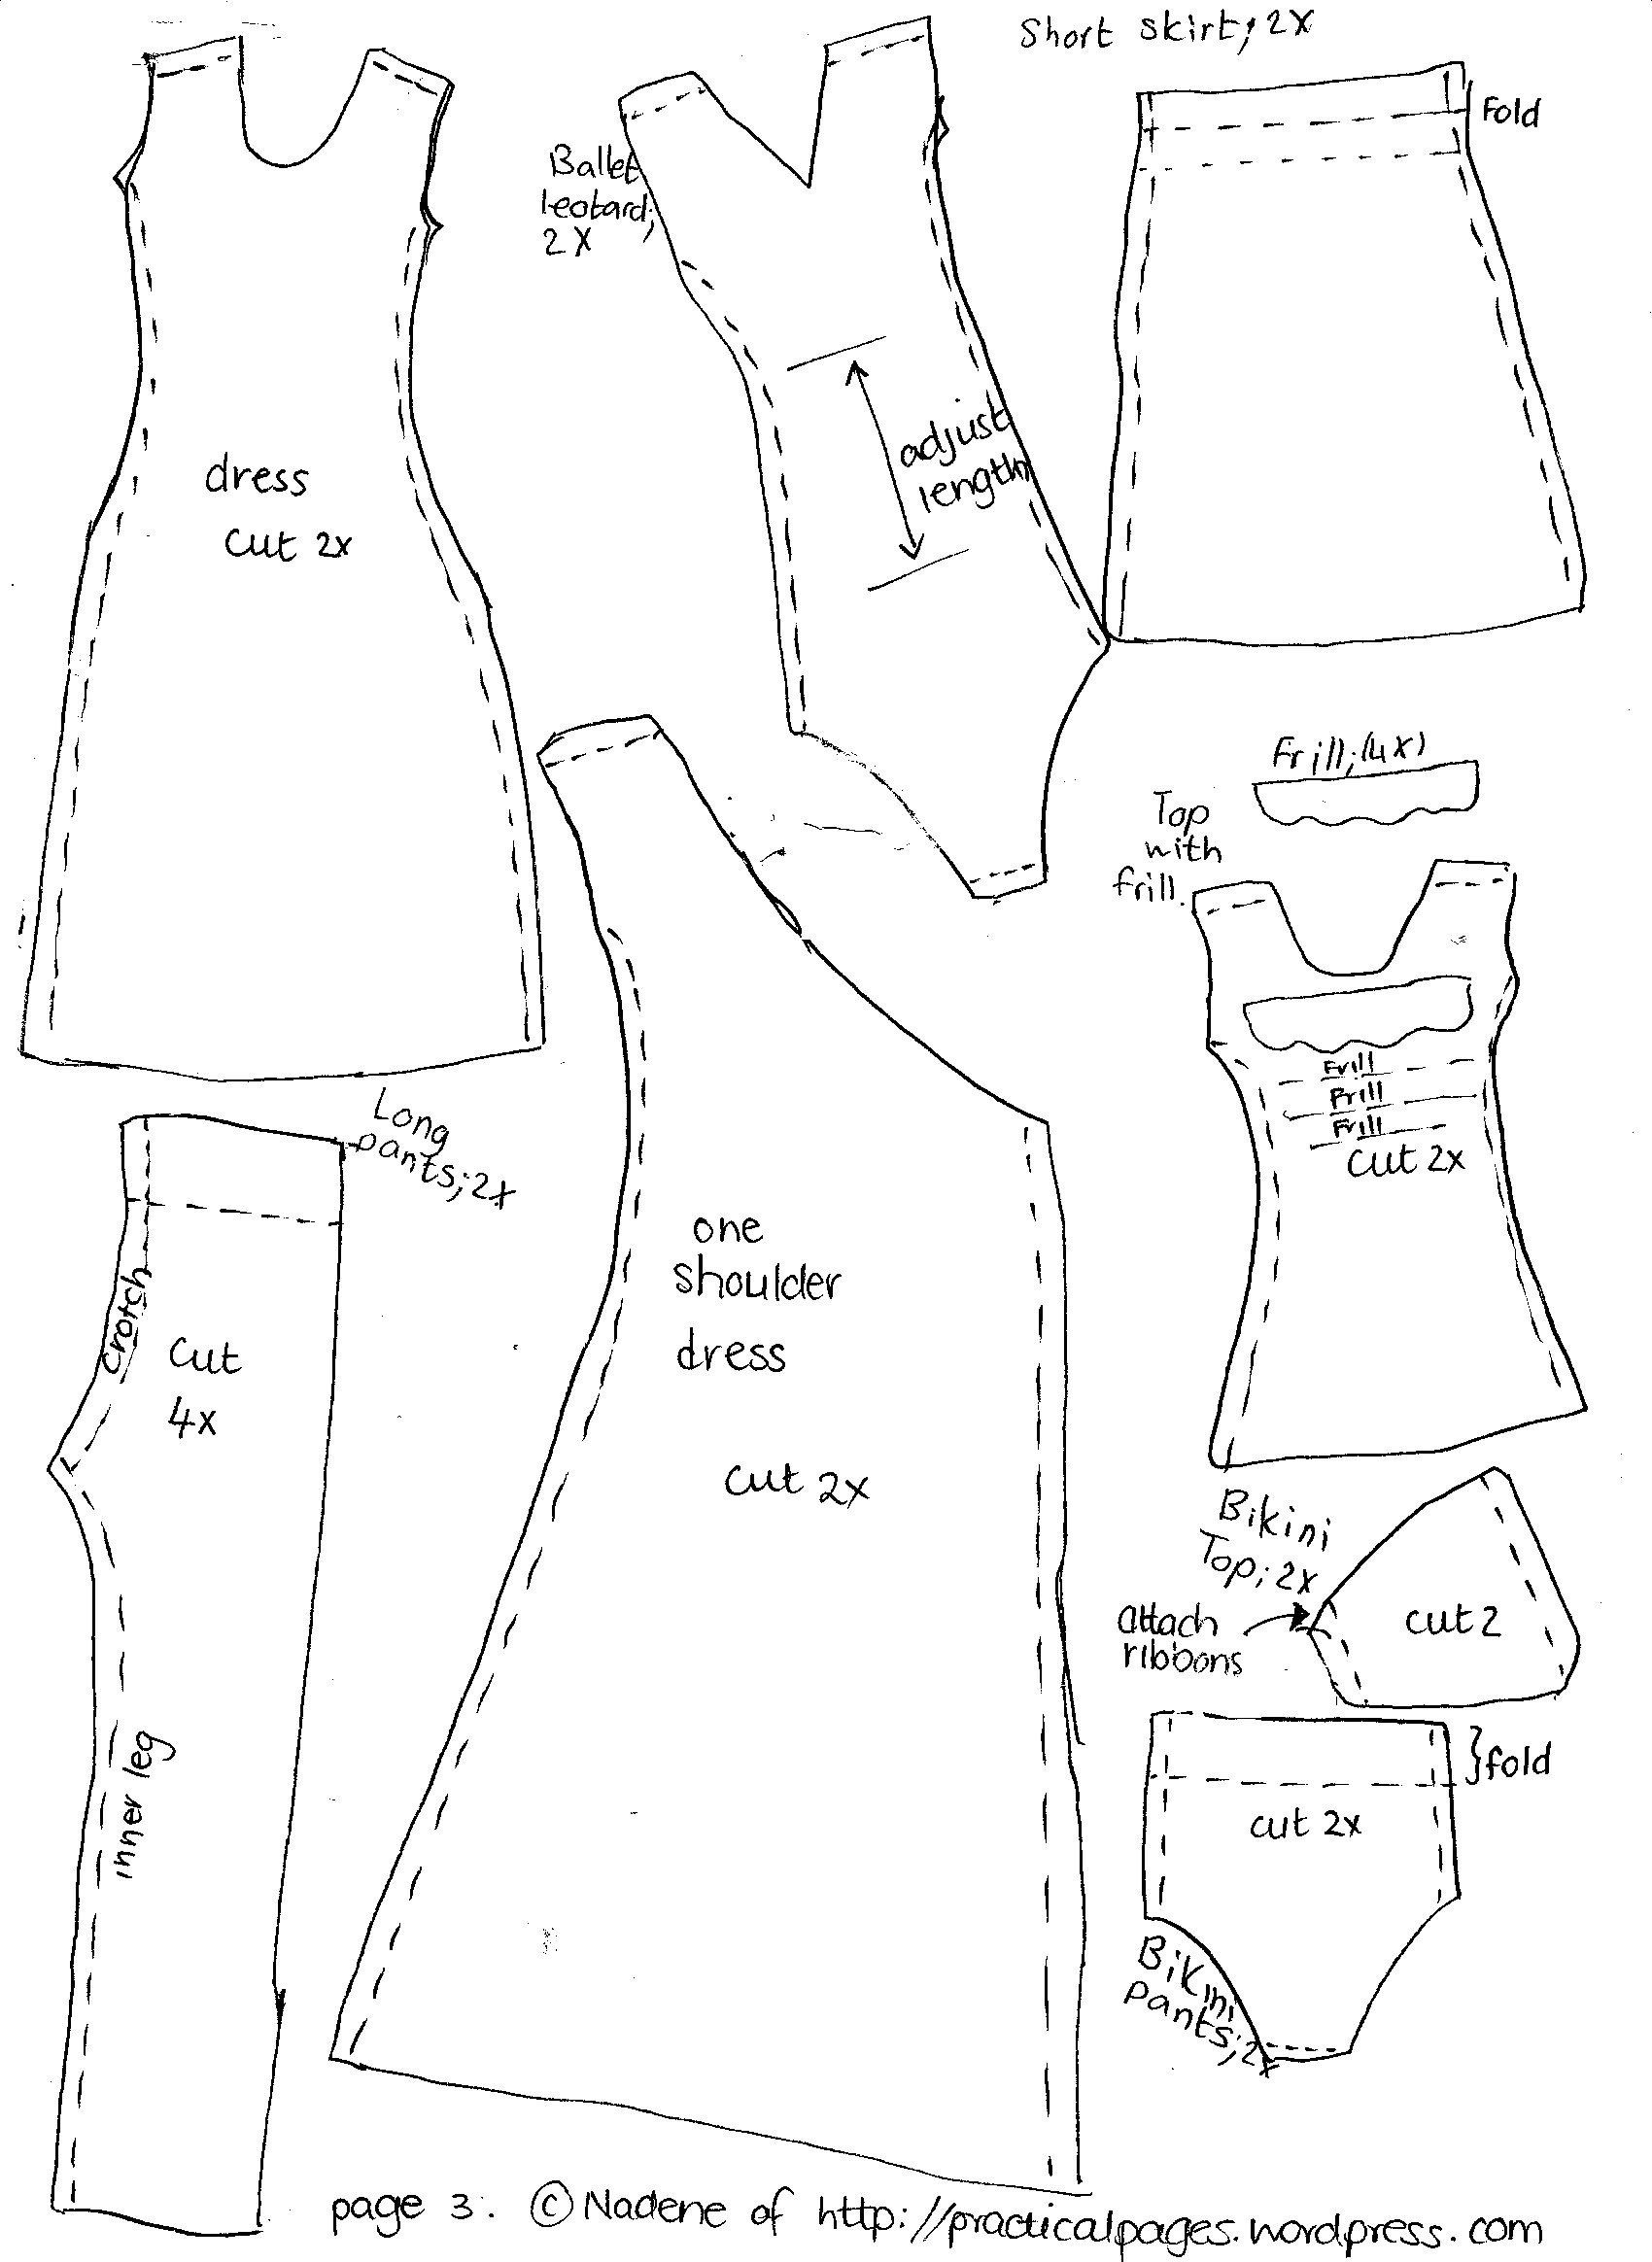 Free Printable American Girl Doll Clothes Patterns Lovely Doll American Girl Doll Clothes 